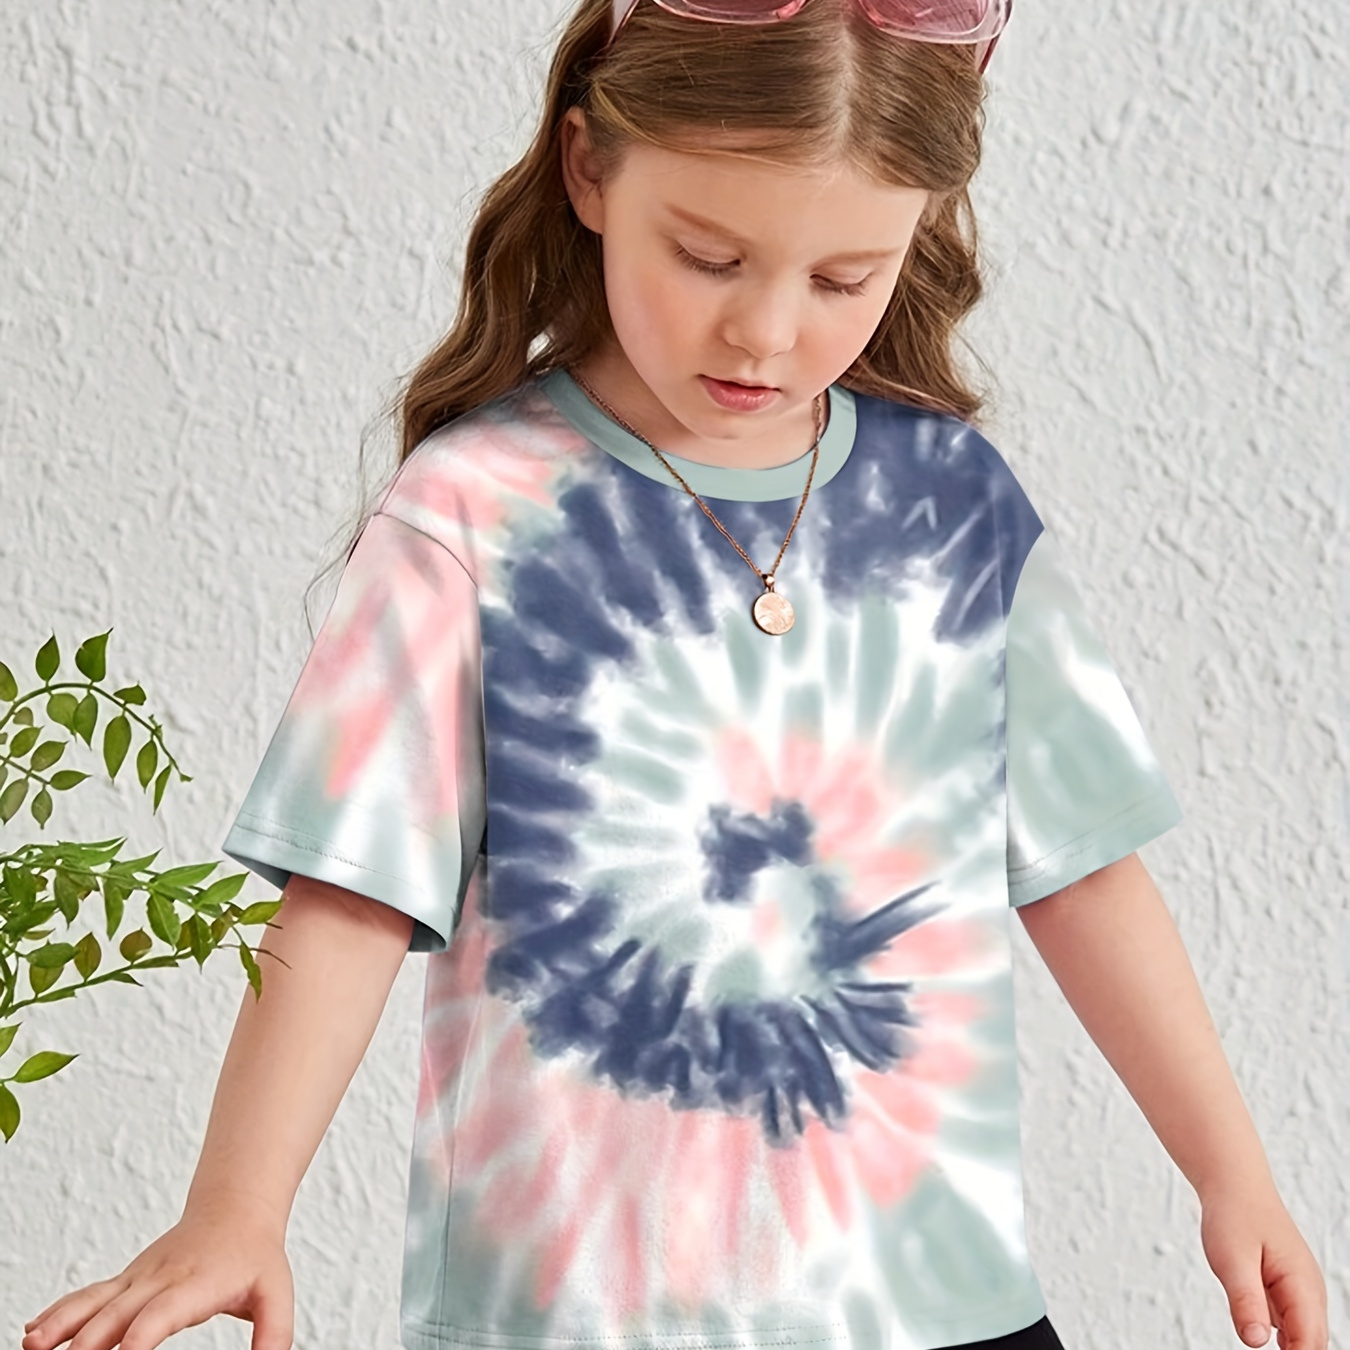 

Tie Dye Pattern Print Short Sleeve T-shirt, Comfy Breathable Tees For Girls Summer